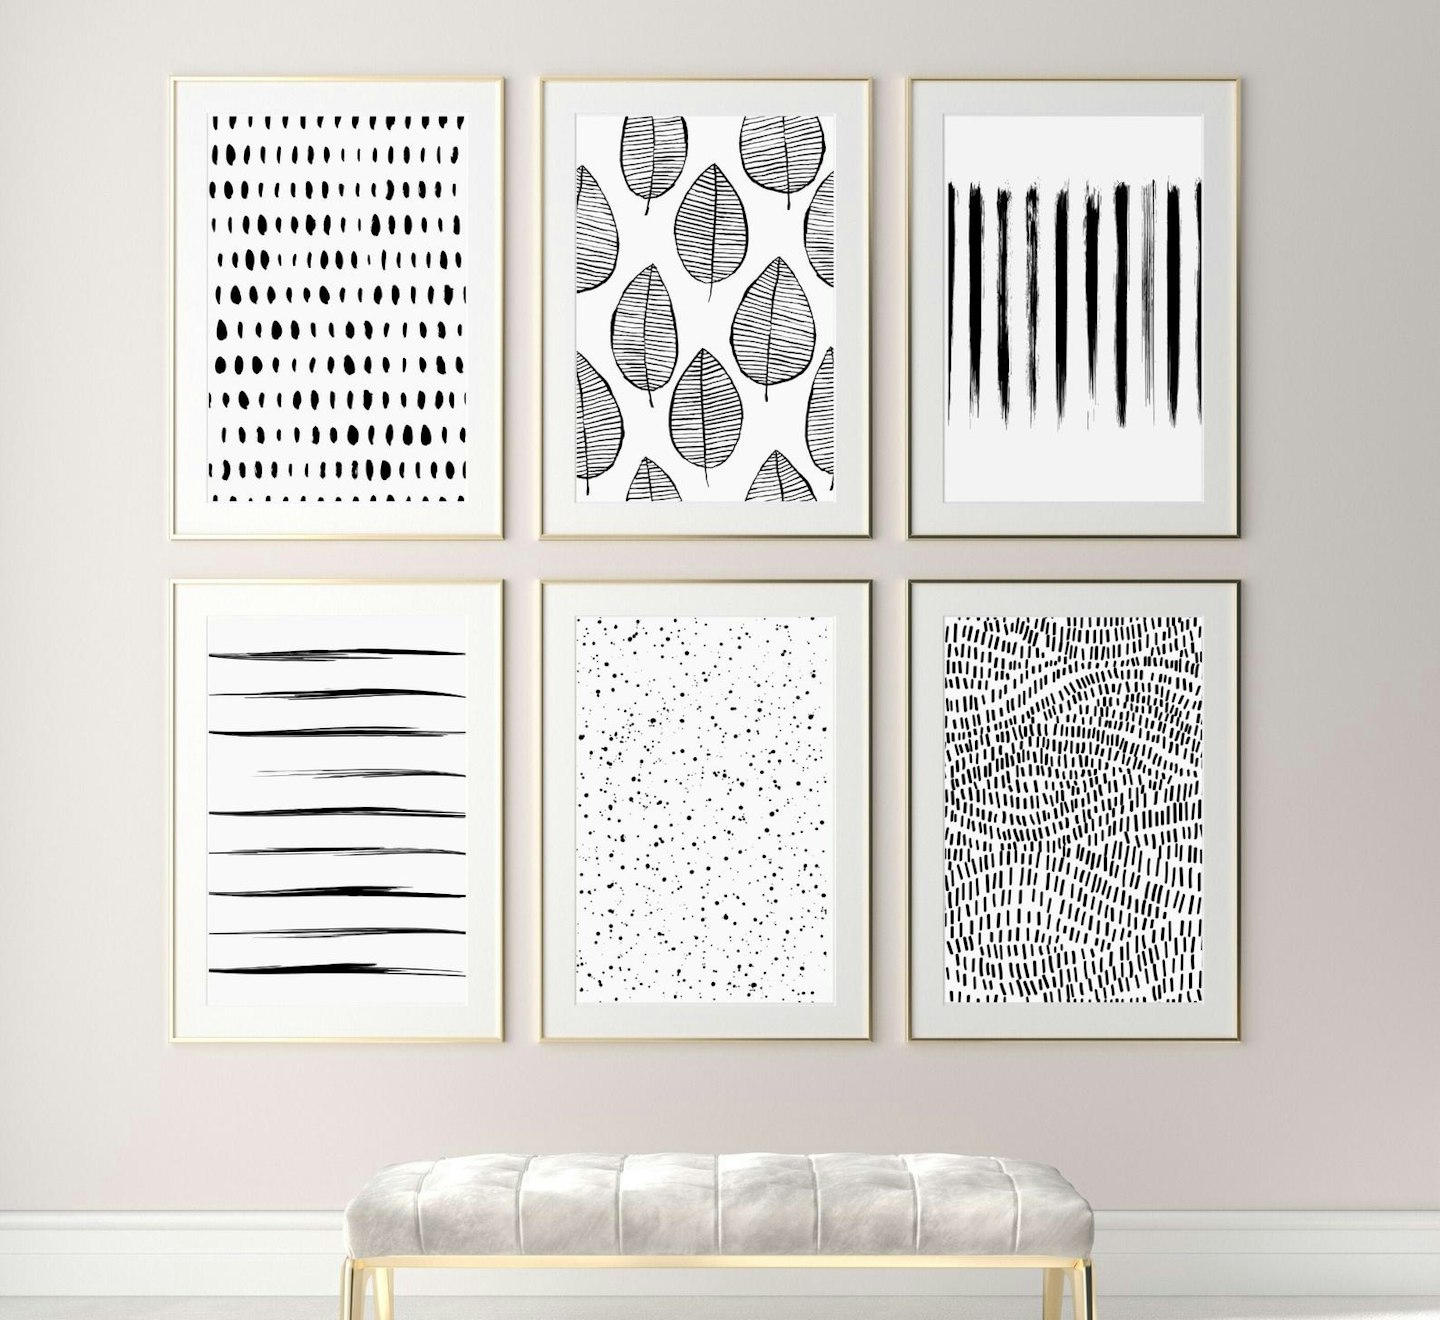 Gallery wall sets